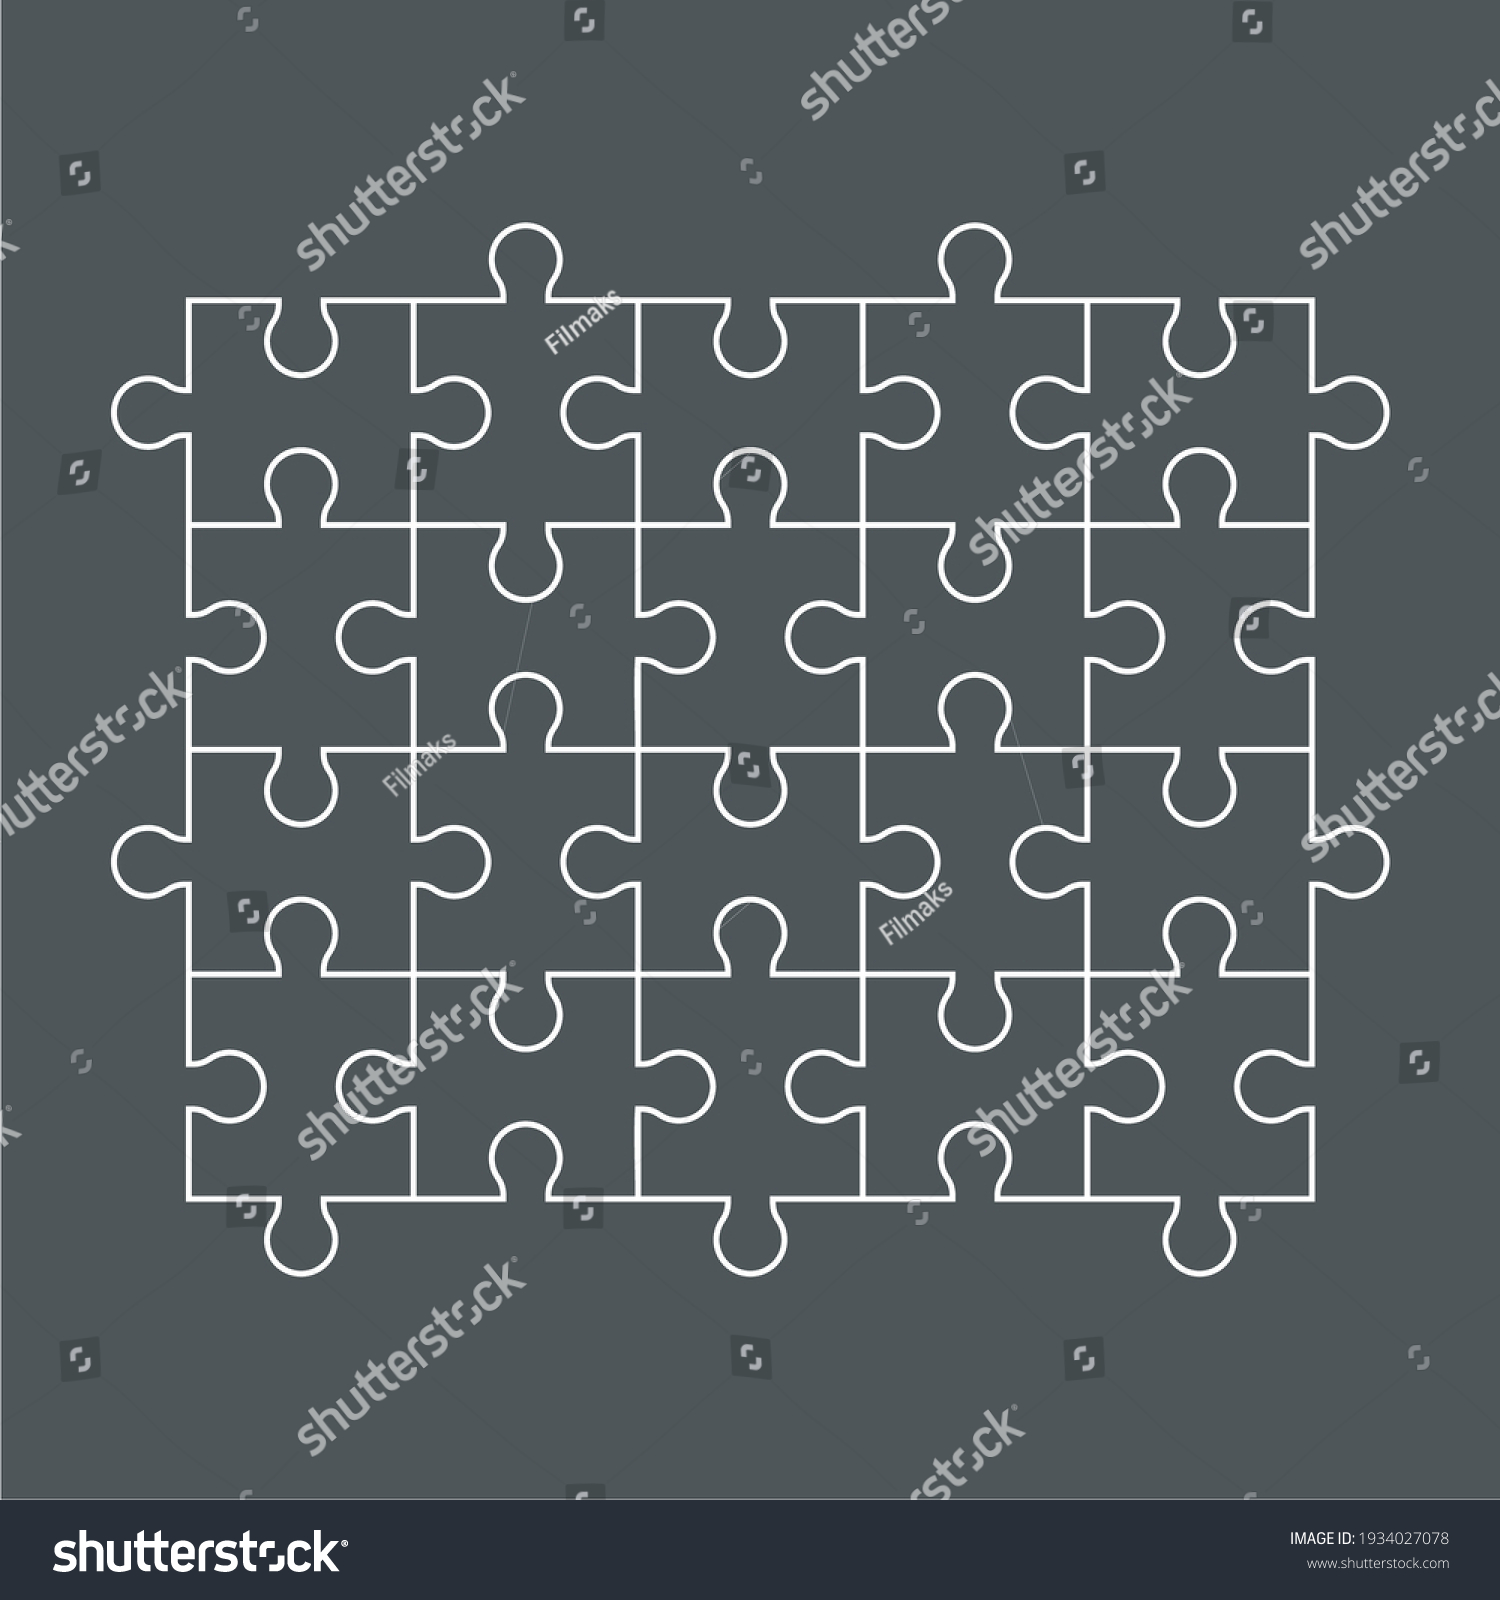 SVG of Puzzle simple piece template quality vector illustration cut svg